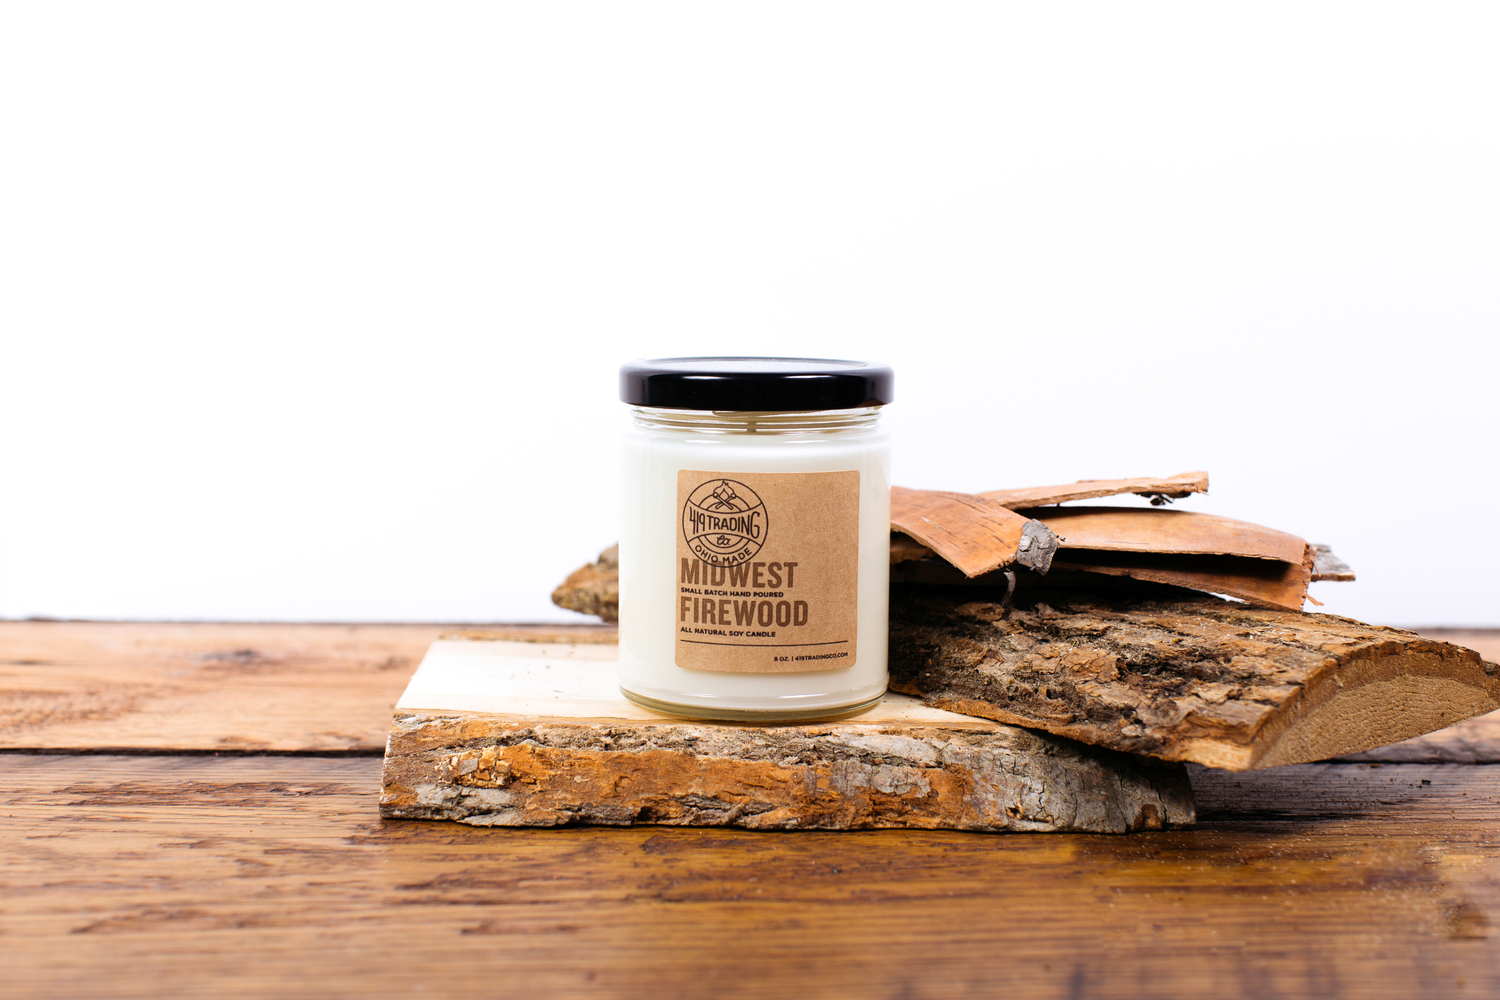 Midwest Firewood Candle, $15